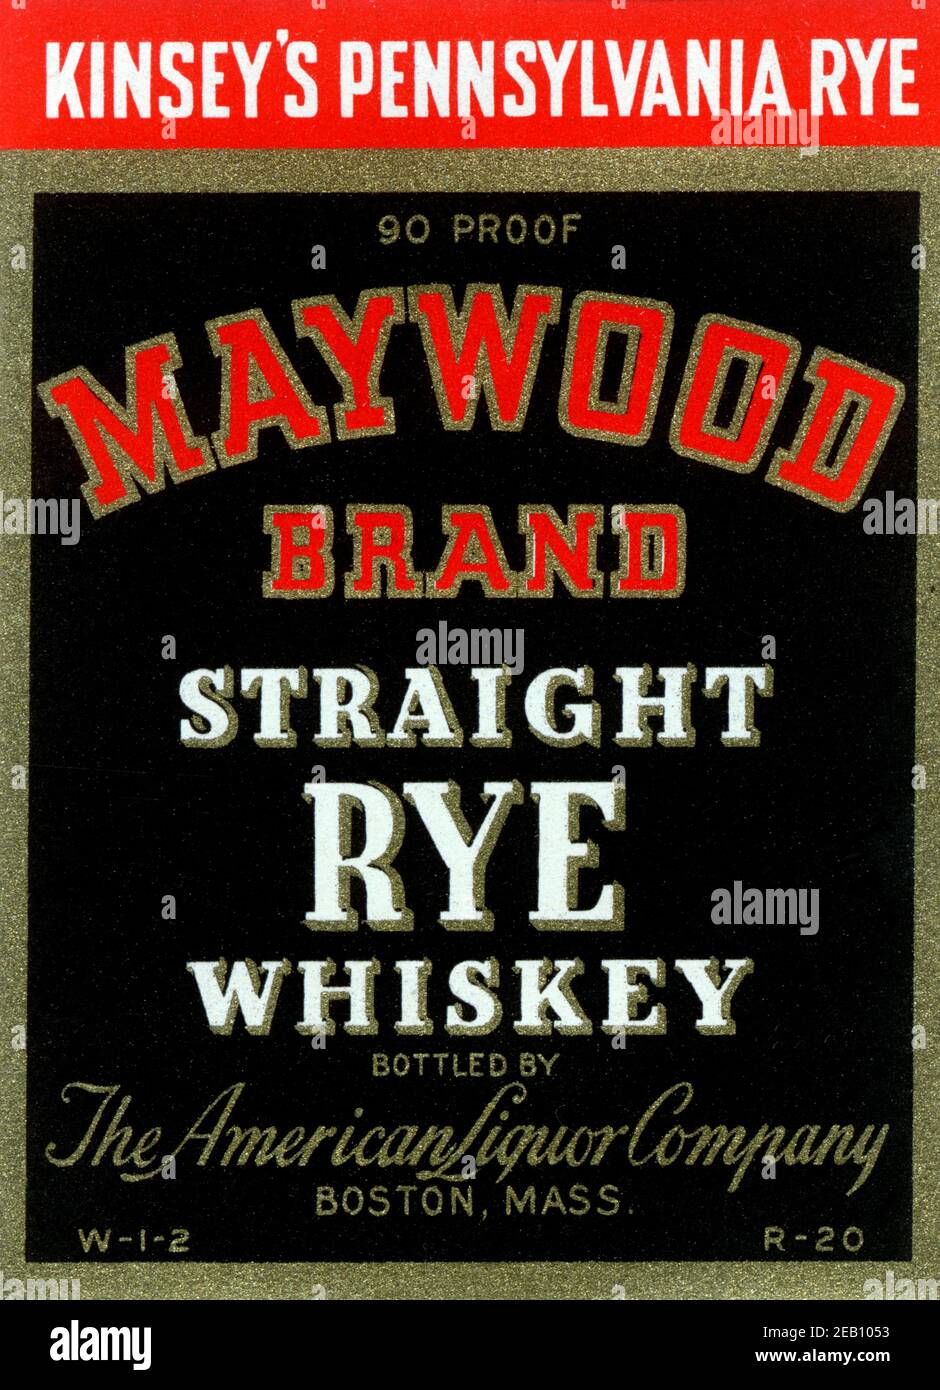 Droit de marque Maywood Rye Whiskey Banque D'Images